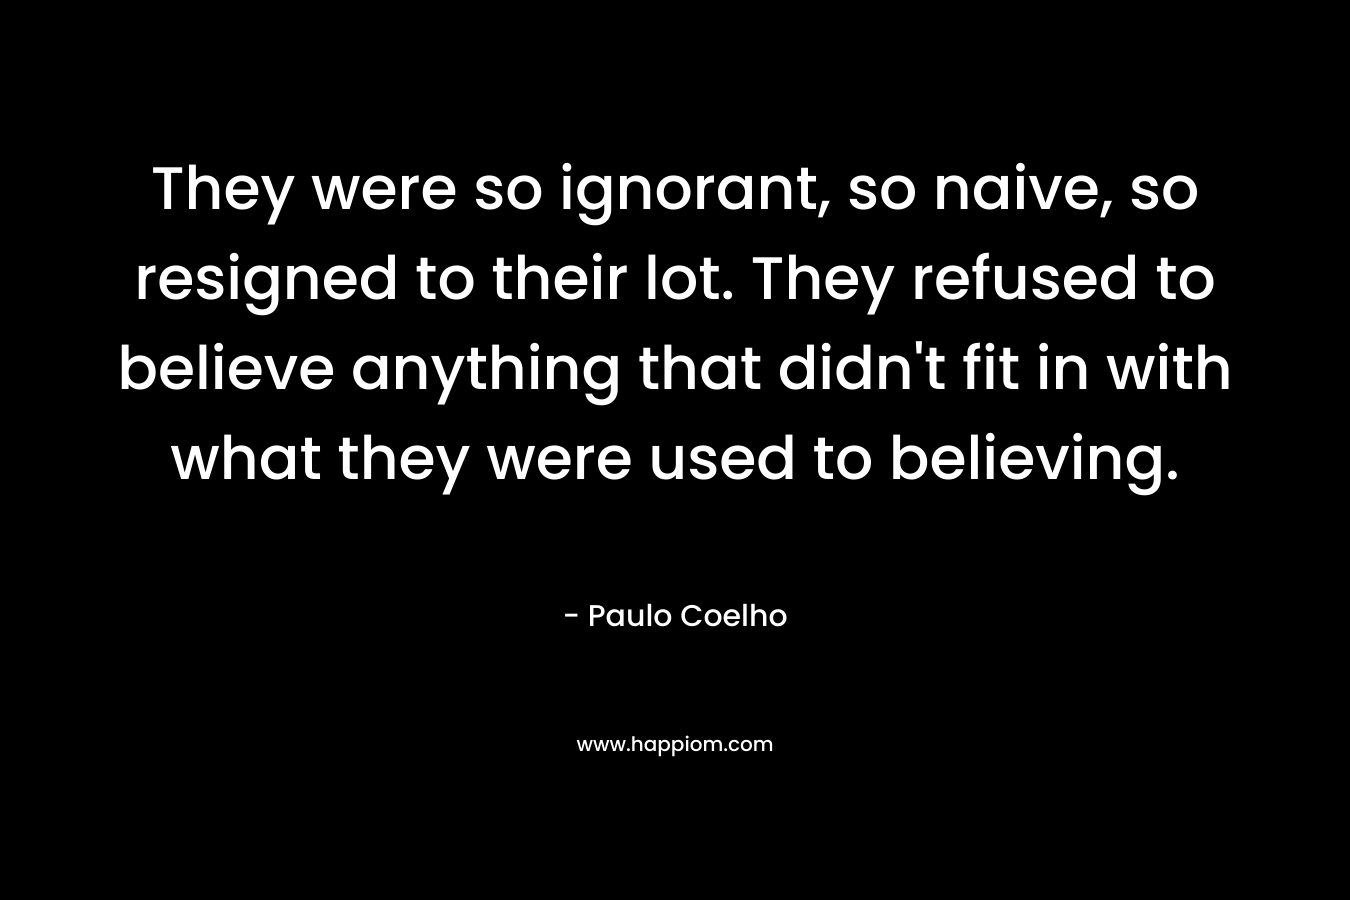 They were so ignorant, so naive, so resigned to their lot. They refused to believe anything that didn't fit in with what they were used to believing.